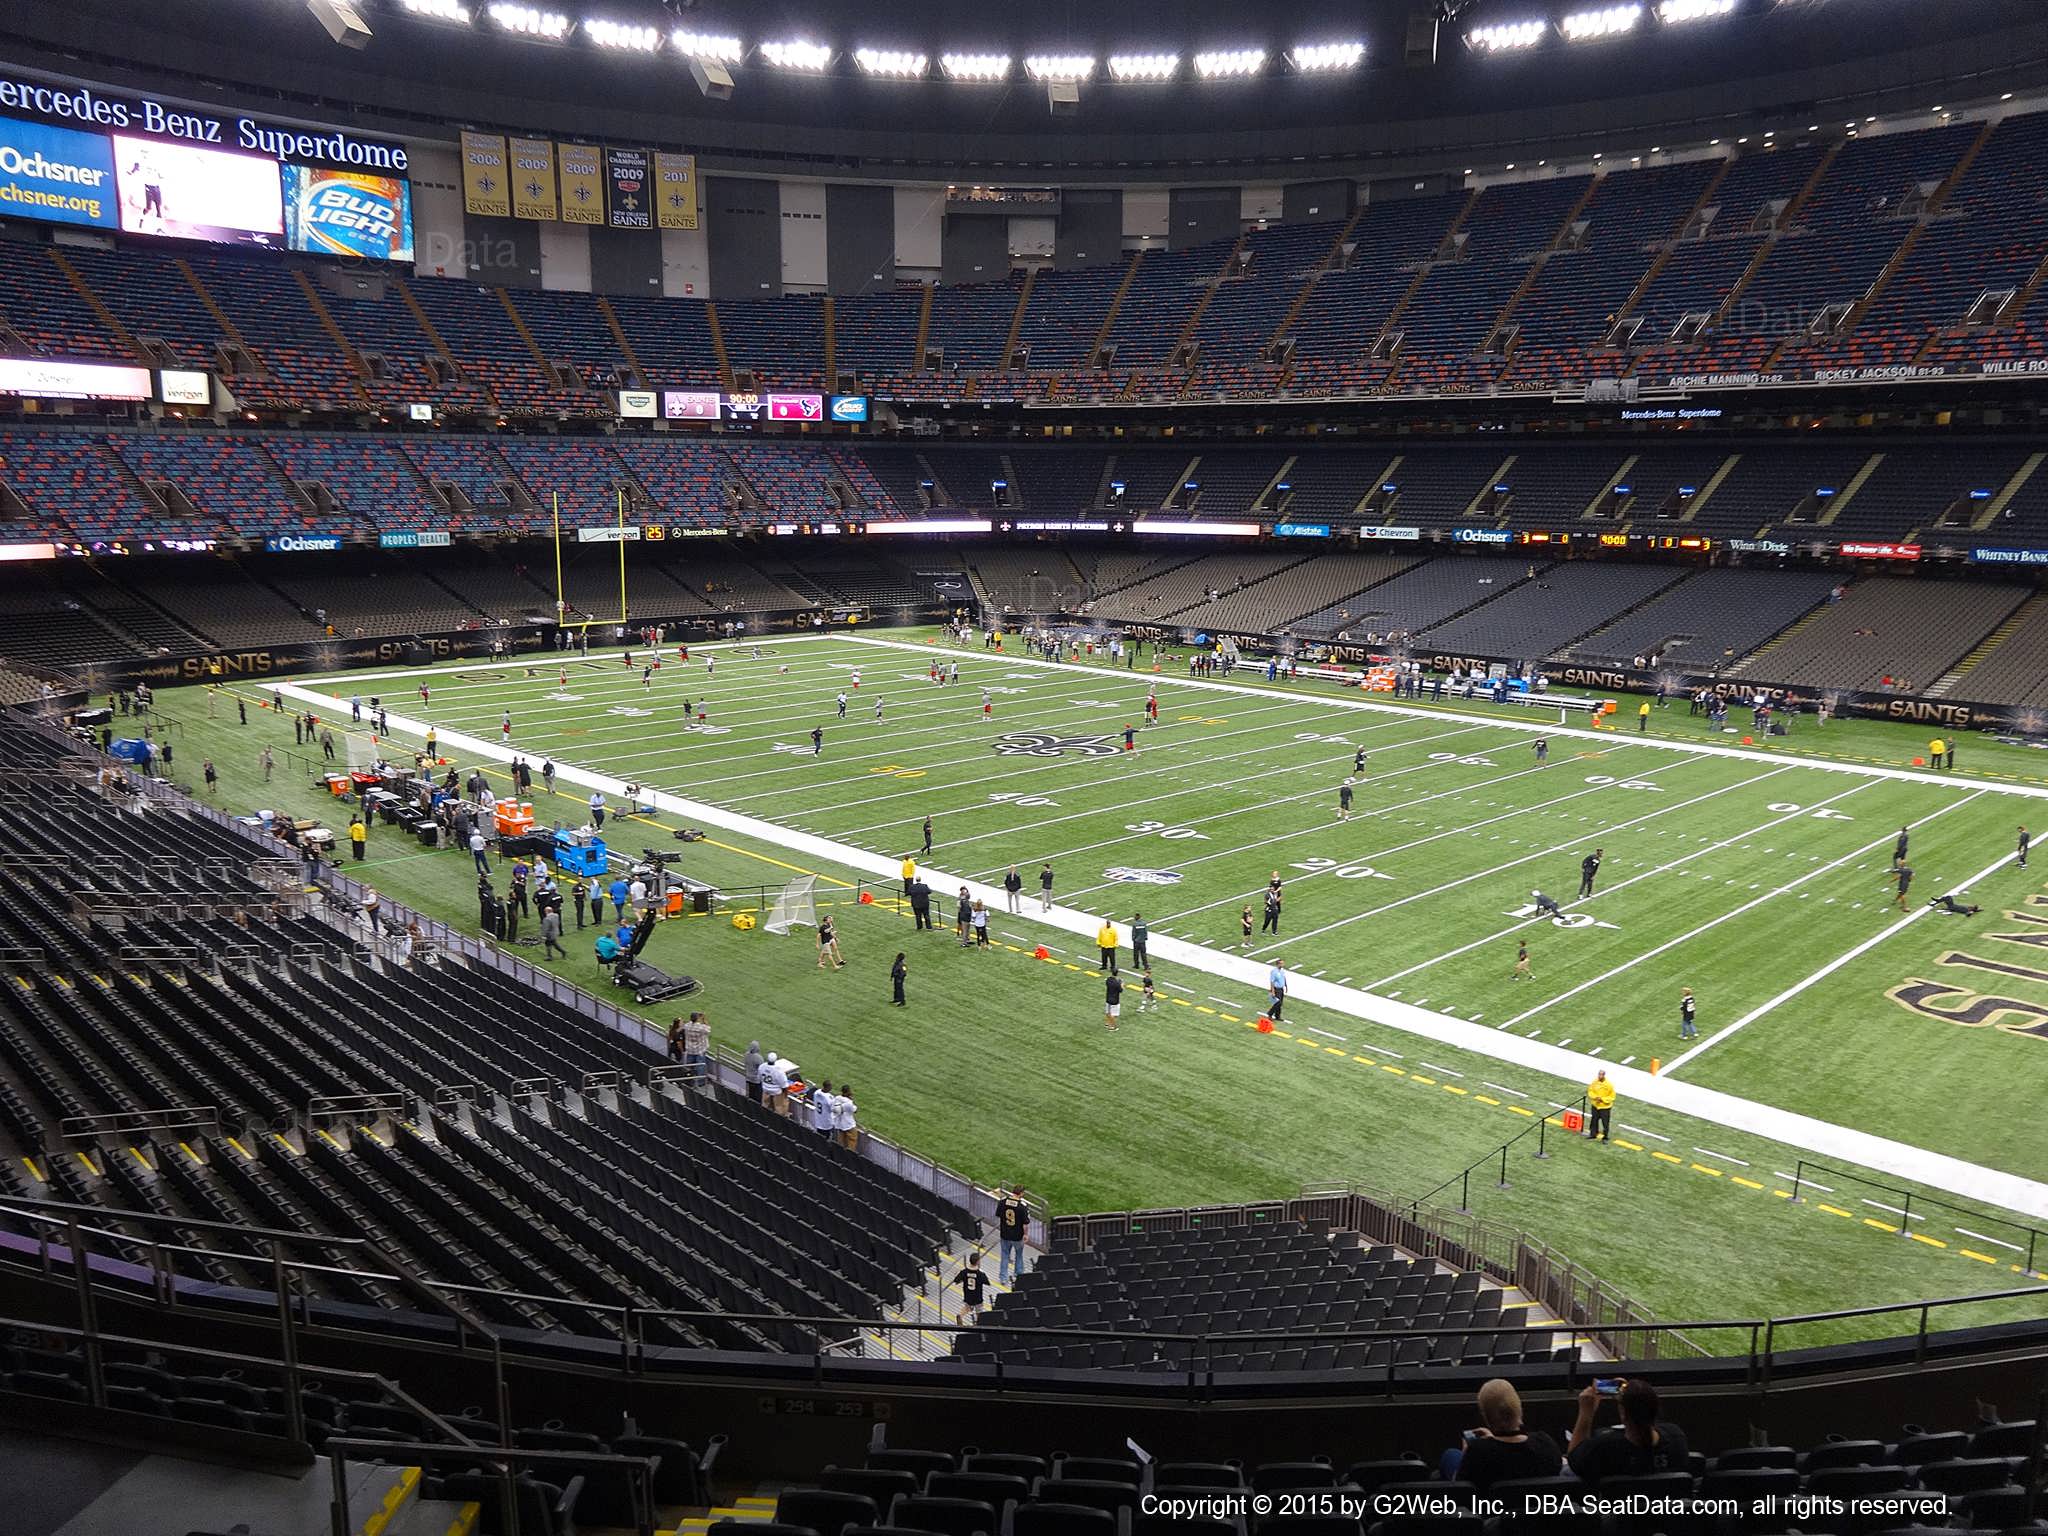 Seat view from section 330 at the Mercedes-Benz Superdome, home of the New Orleans Saints